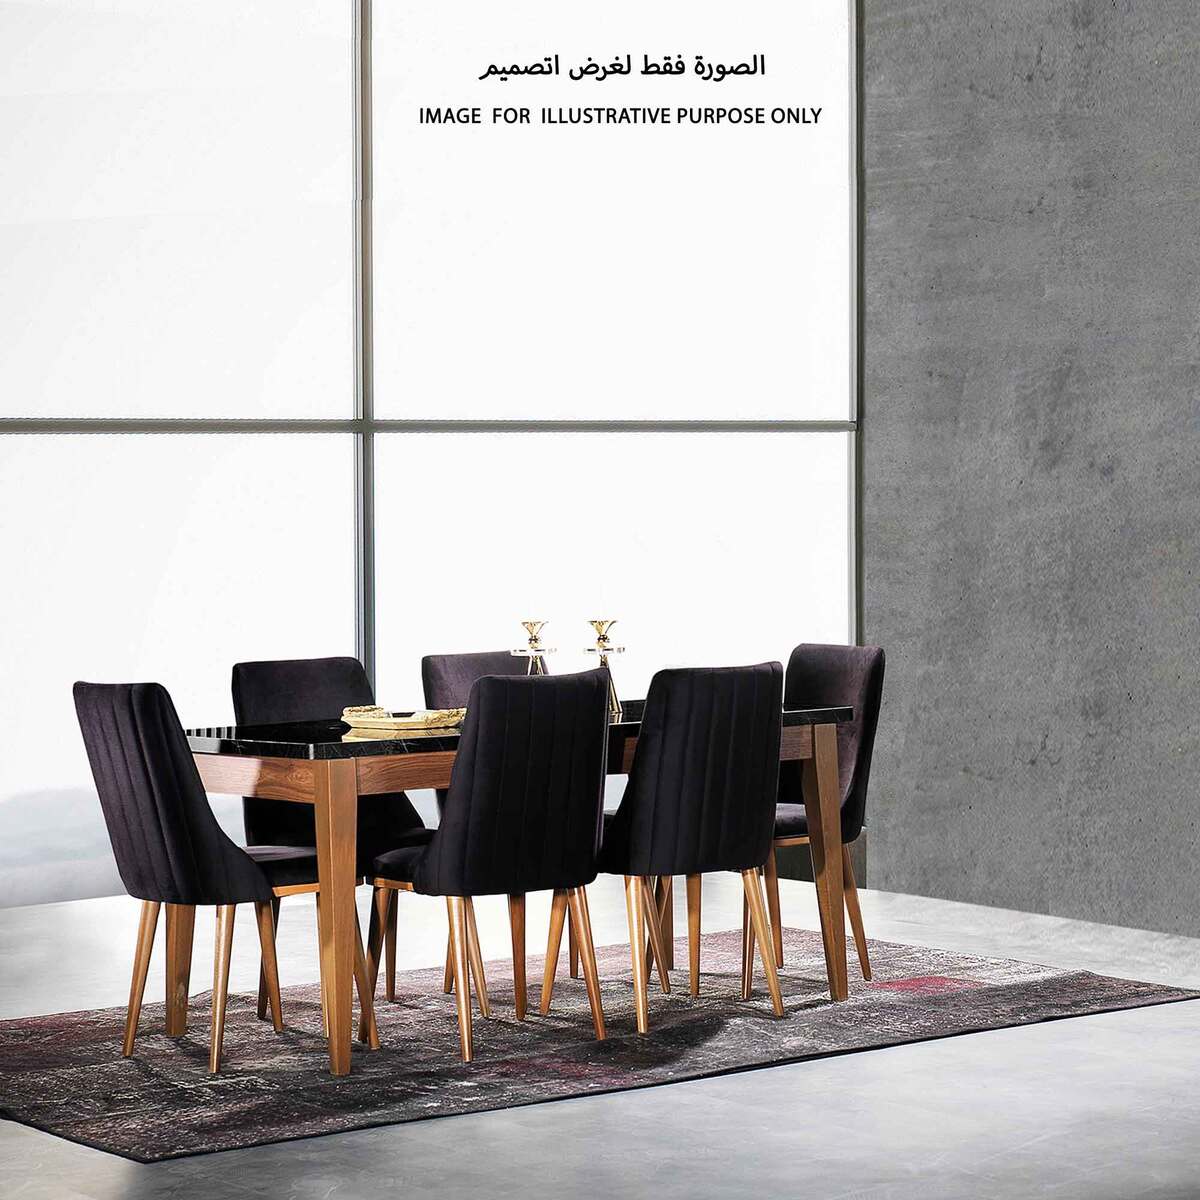 LIZBON Extendable Dining Table+6 Chair .Size Table:Size:73.5x90x160-200 Cms (HxWxL). Size Chair:90x50x48 Cms(HxWxD)